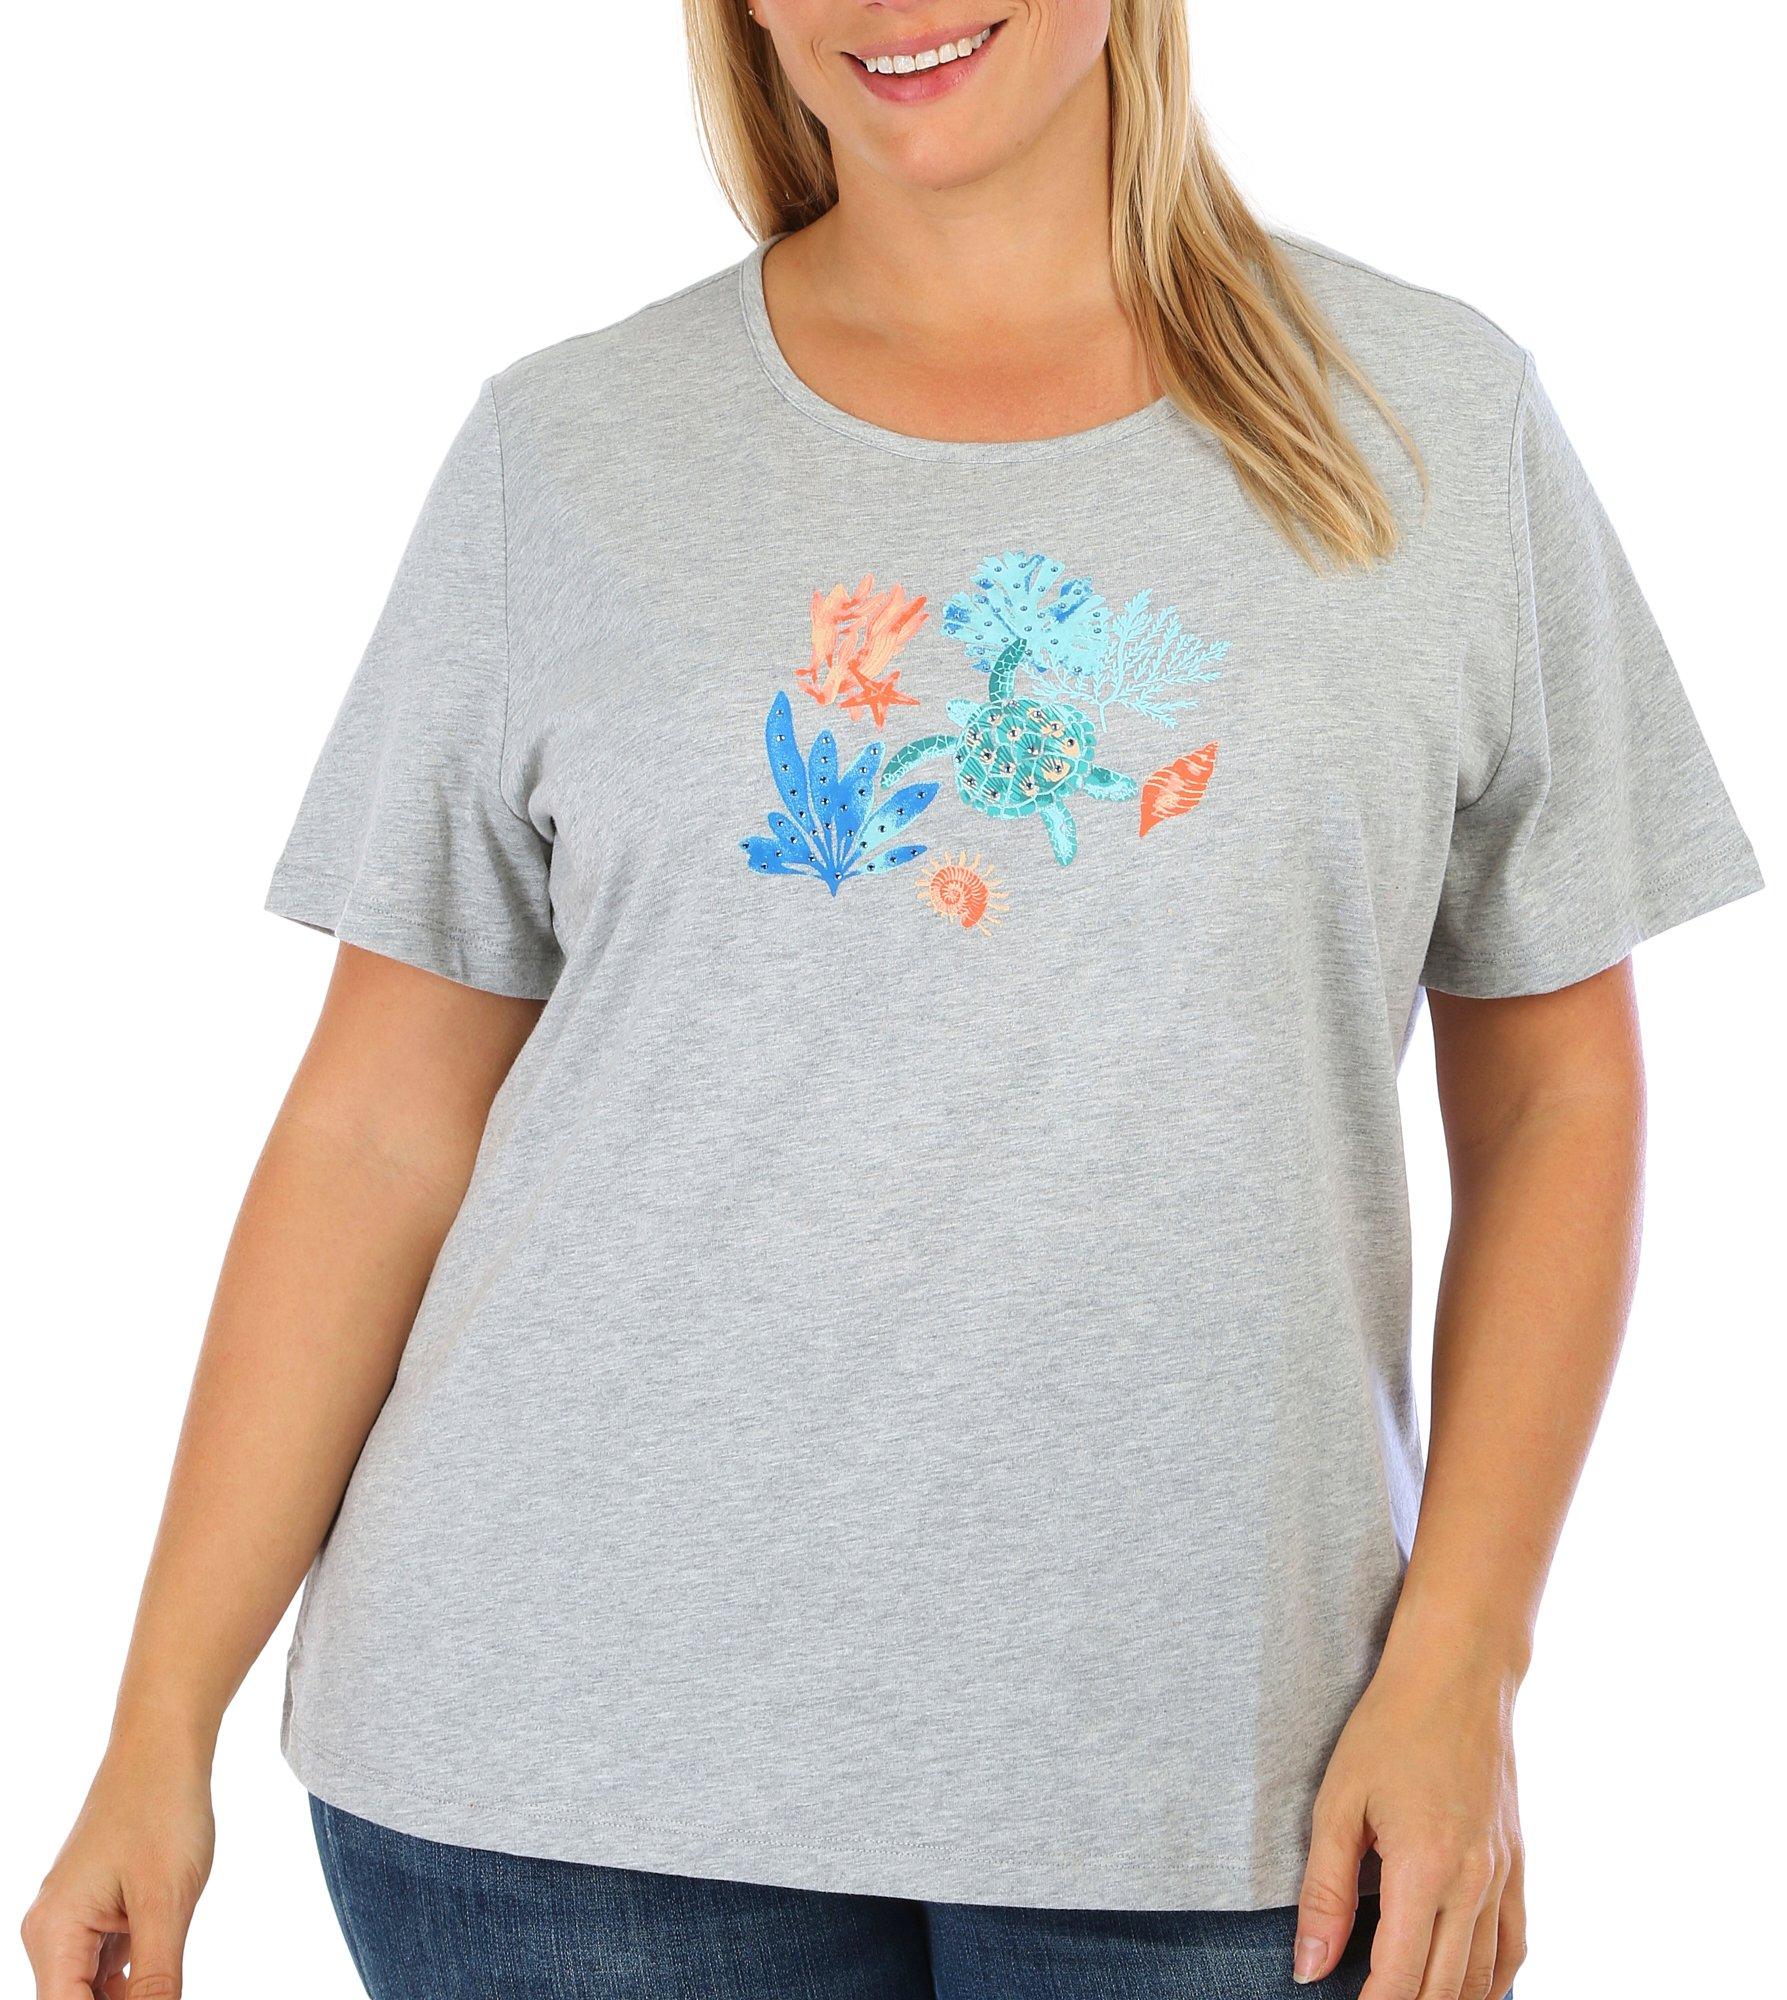 Coral Bay Plus Embellished Under The Sea Short Sleeve Top